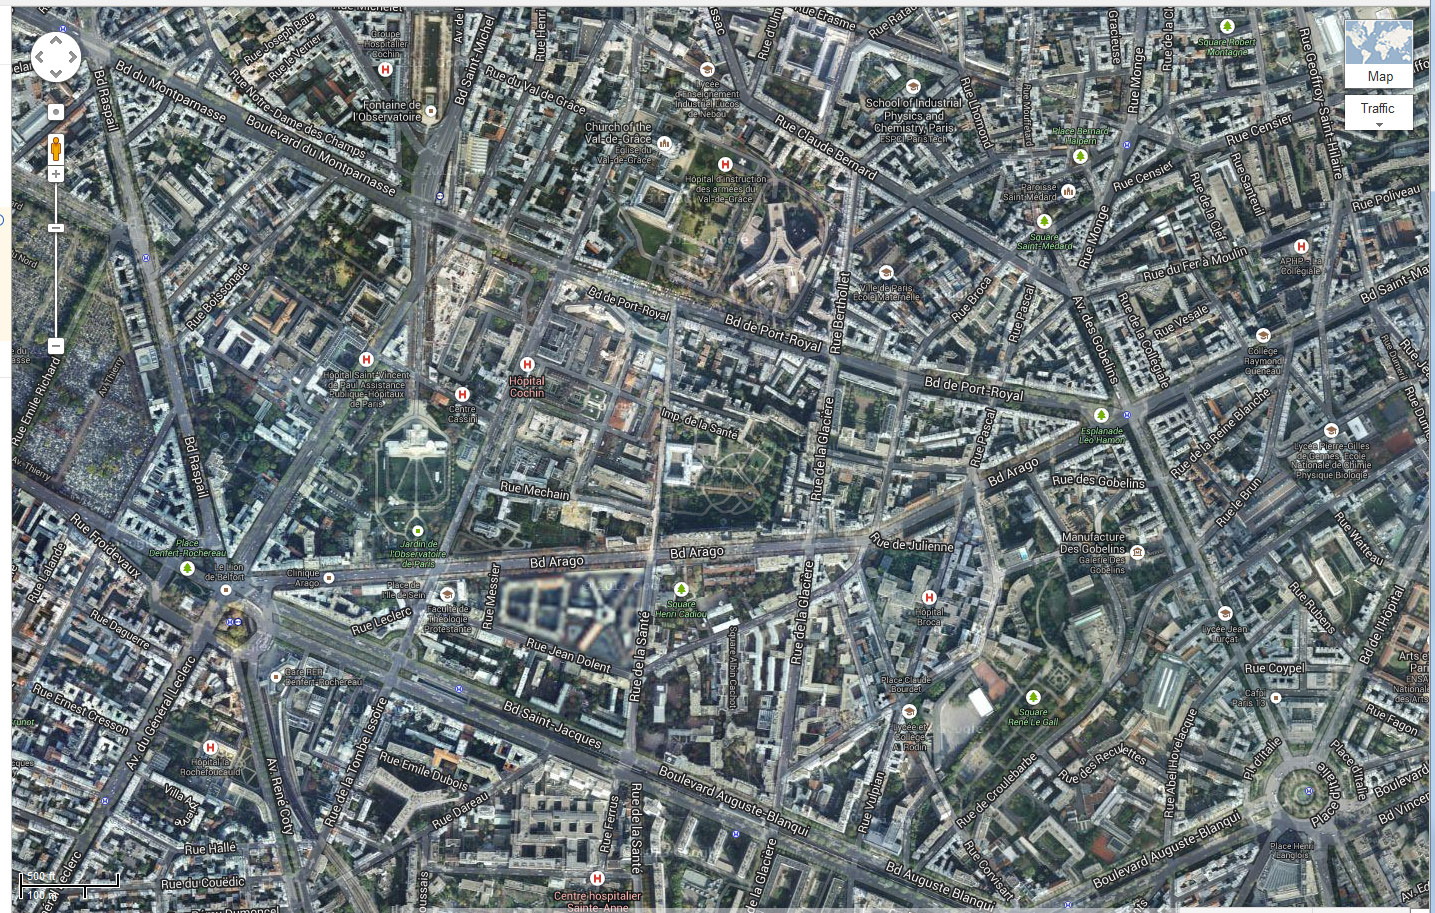 Section of Paris seen from Google Maps